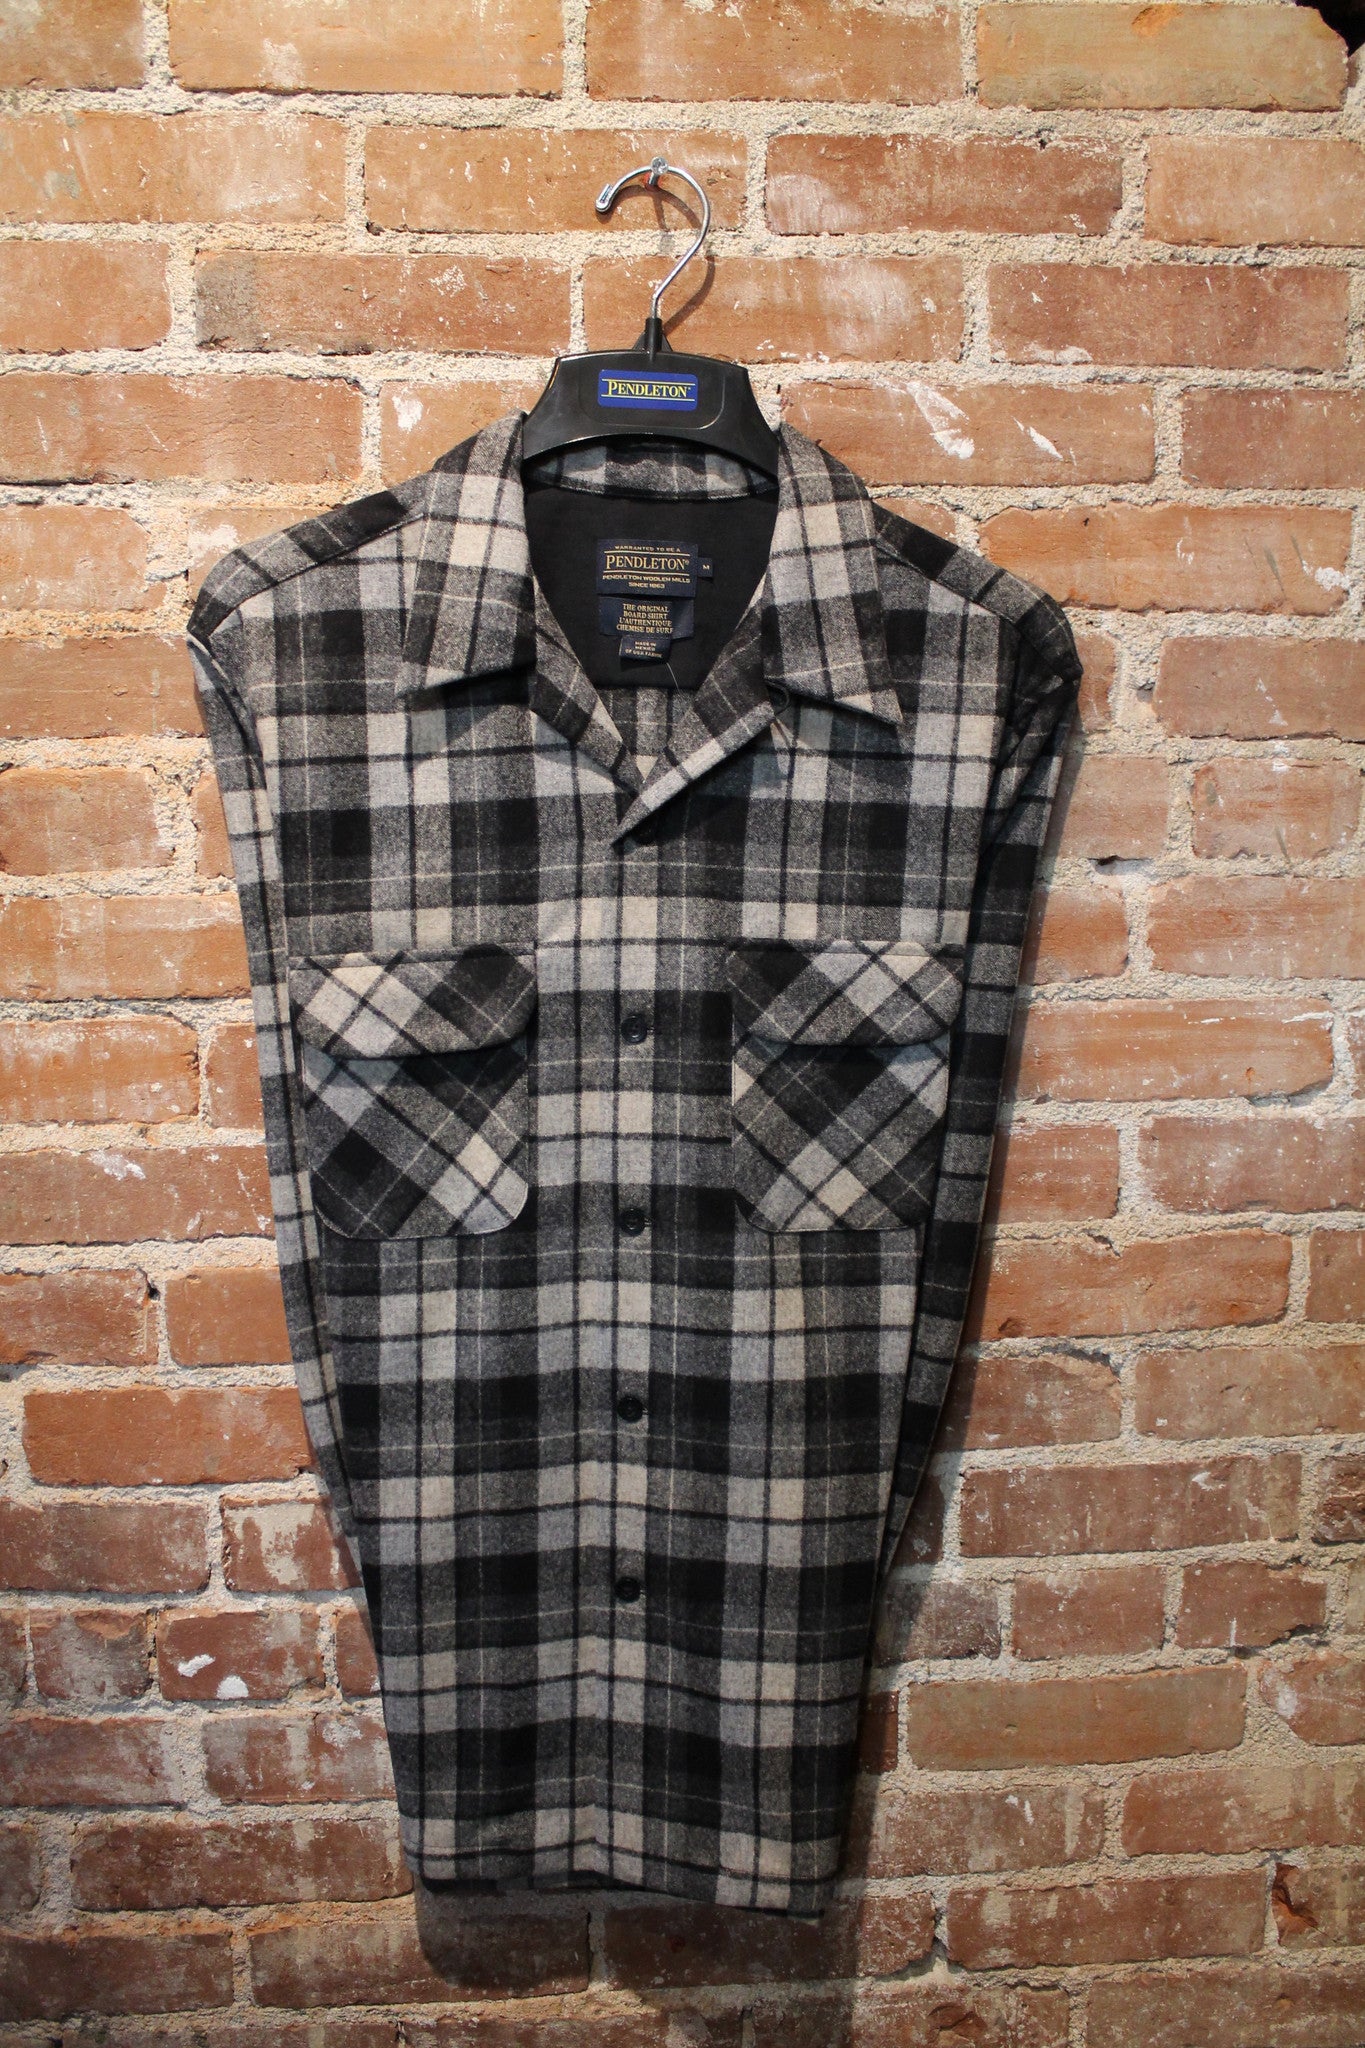 Pendleton Clothing | Quality Flannel Clothing And Accessories ...